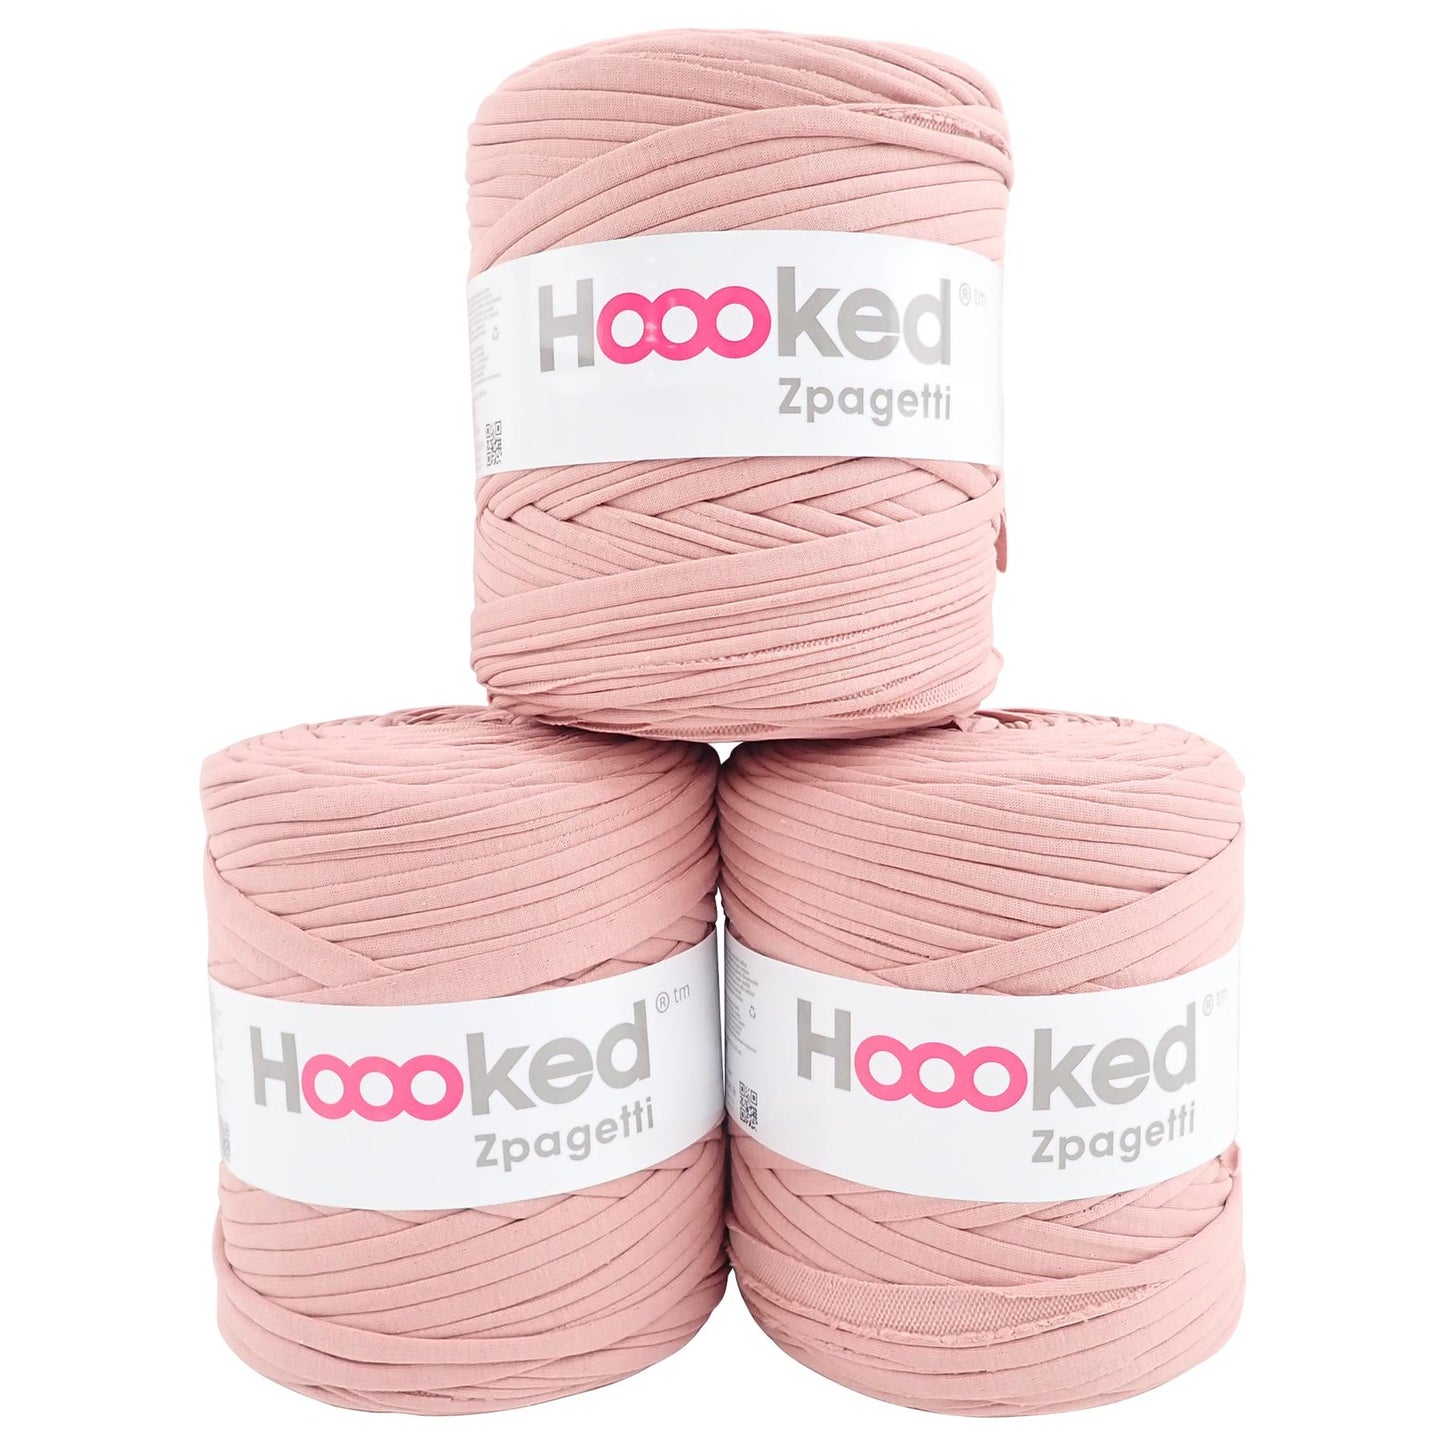 Hoooked Zpagetti Vintage Pink Cotton T-Shirt Yarn - 120M 700g (Pack of 3)